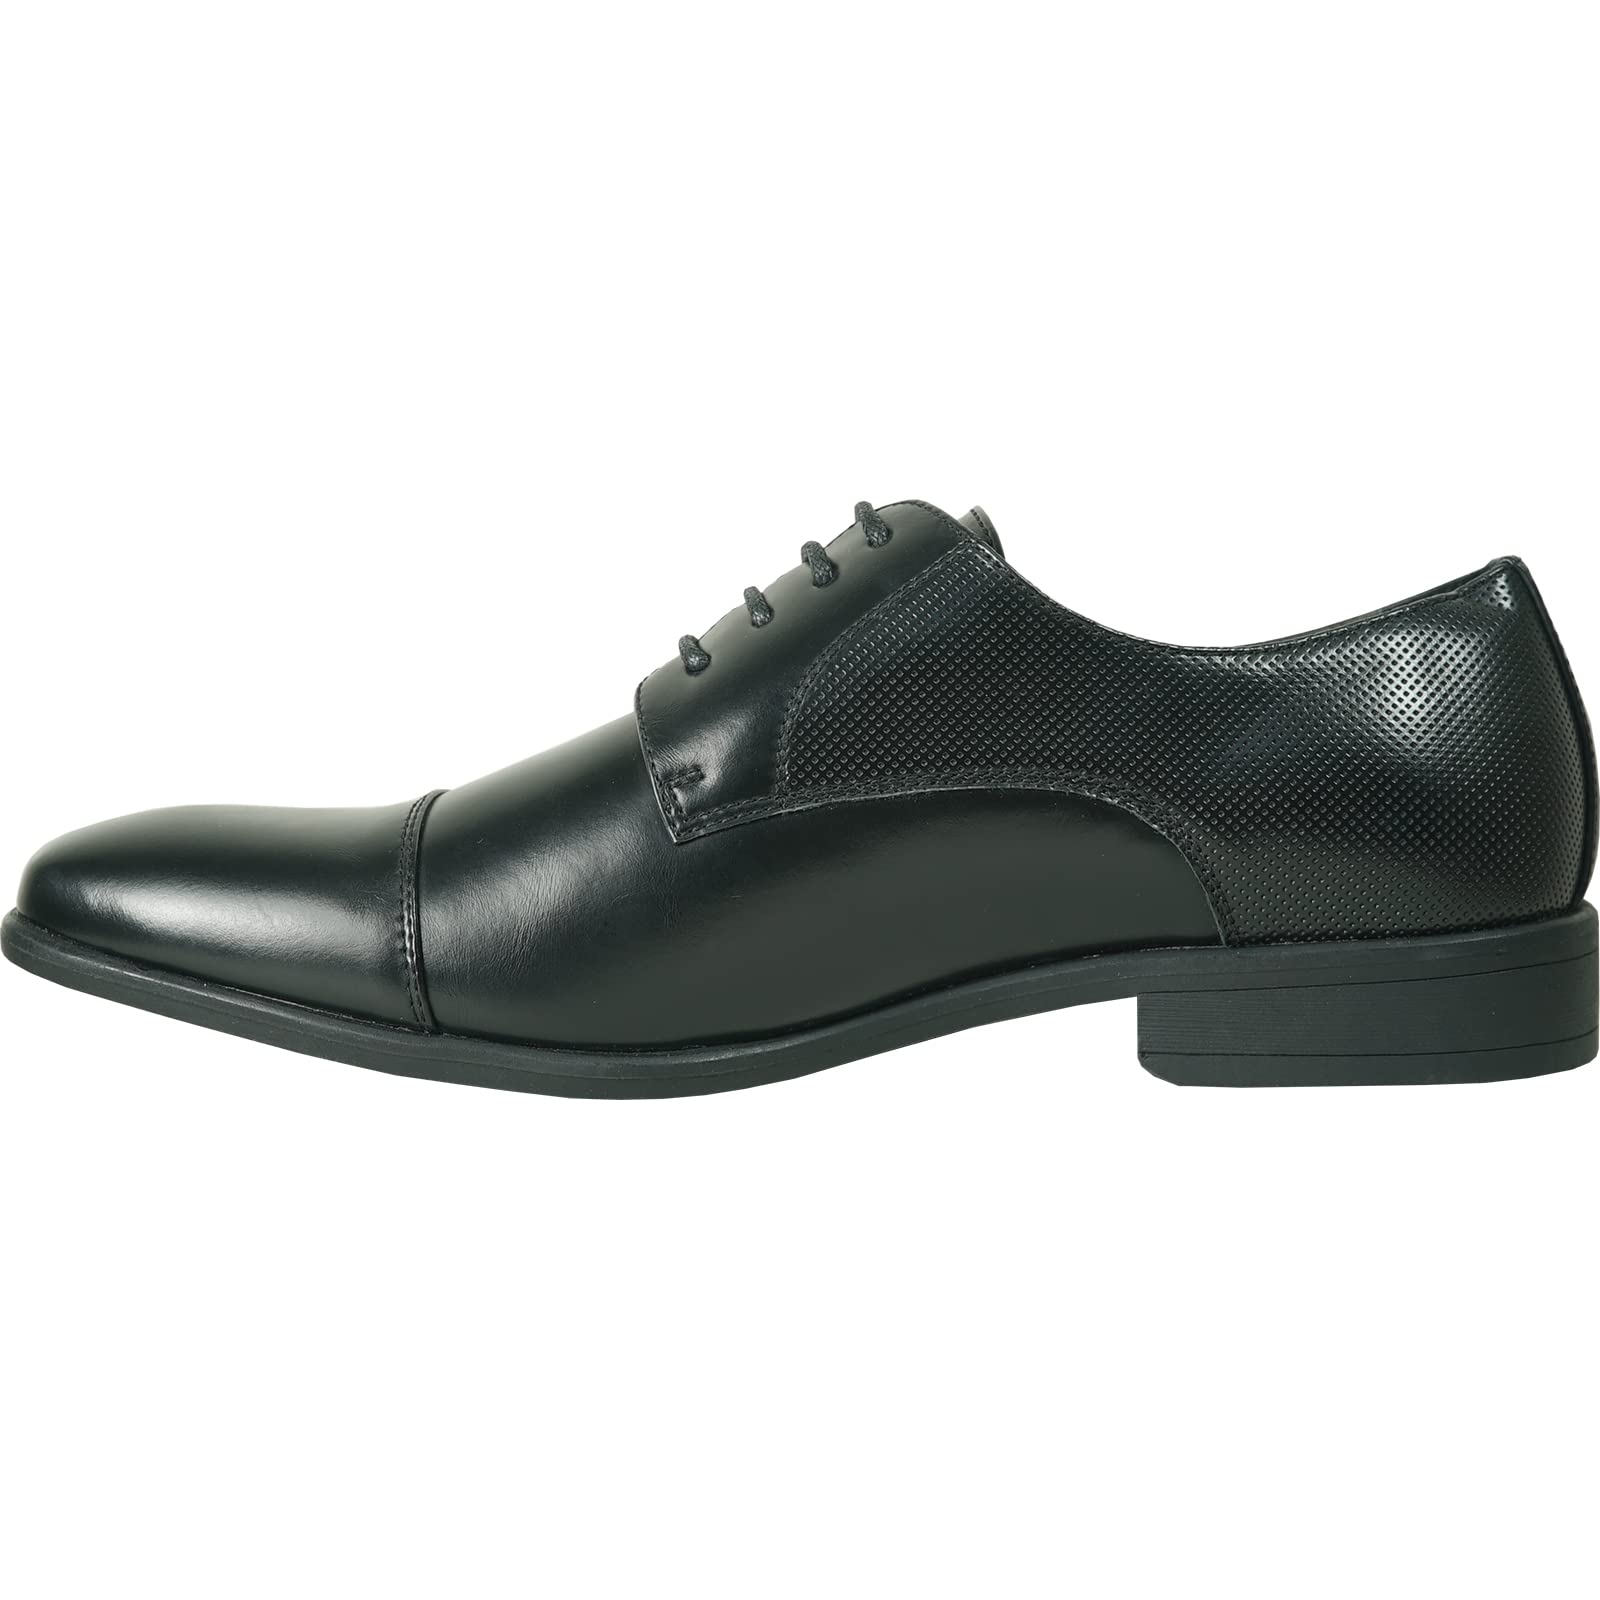 Bravo! Men Dress Shoe King-6 King-7 Classic Lace Up Oxford Plain or Cap Toe with Leather Sock Medium and Wide Width Black and Cognac